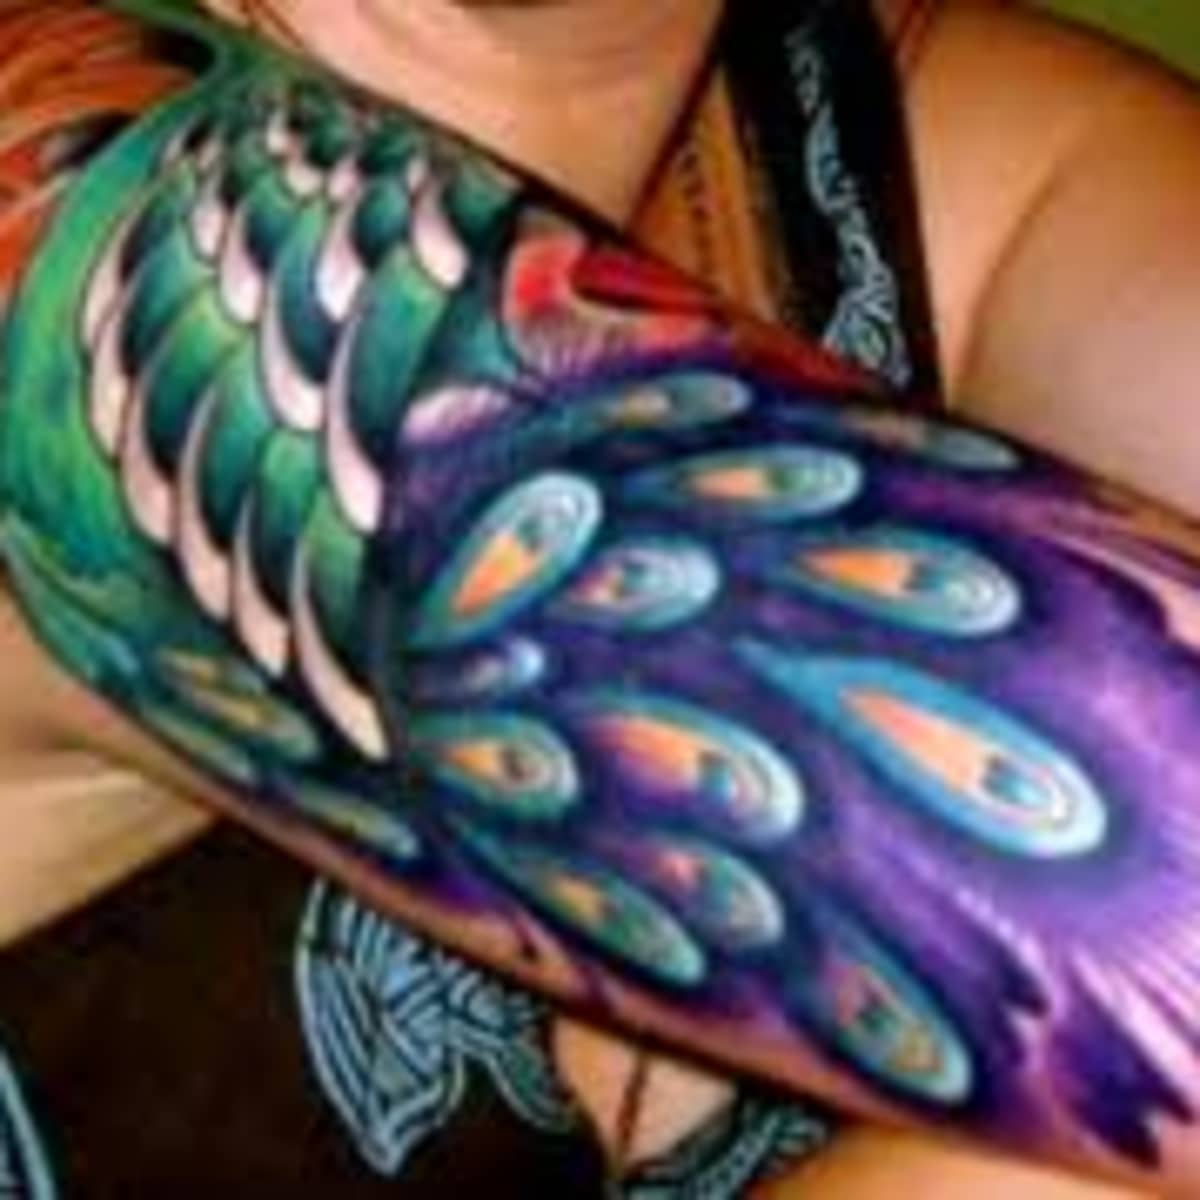 Peacock Tattoos And Meanings-Peacock Feather Tattoos And Meanings-Peacock Tattoo  Designs - HubPages